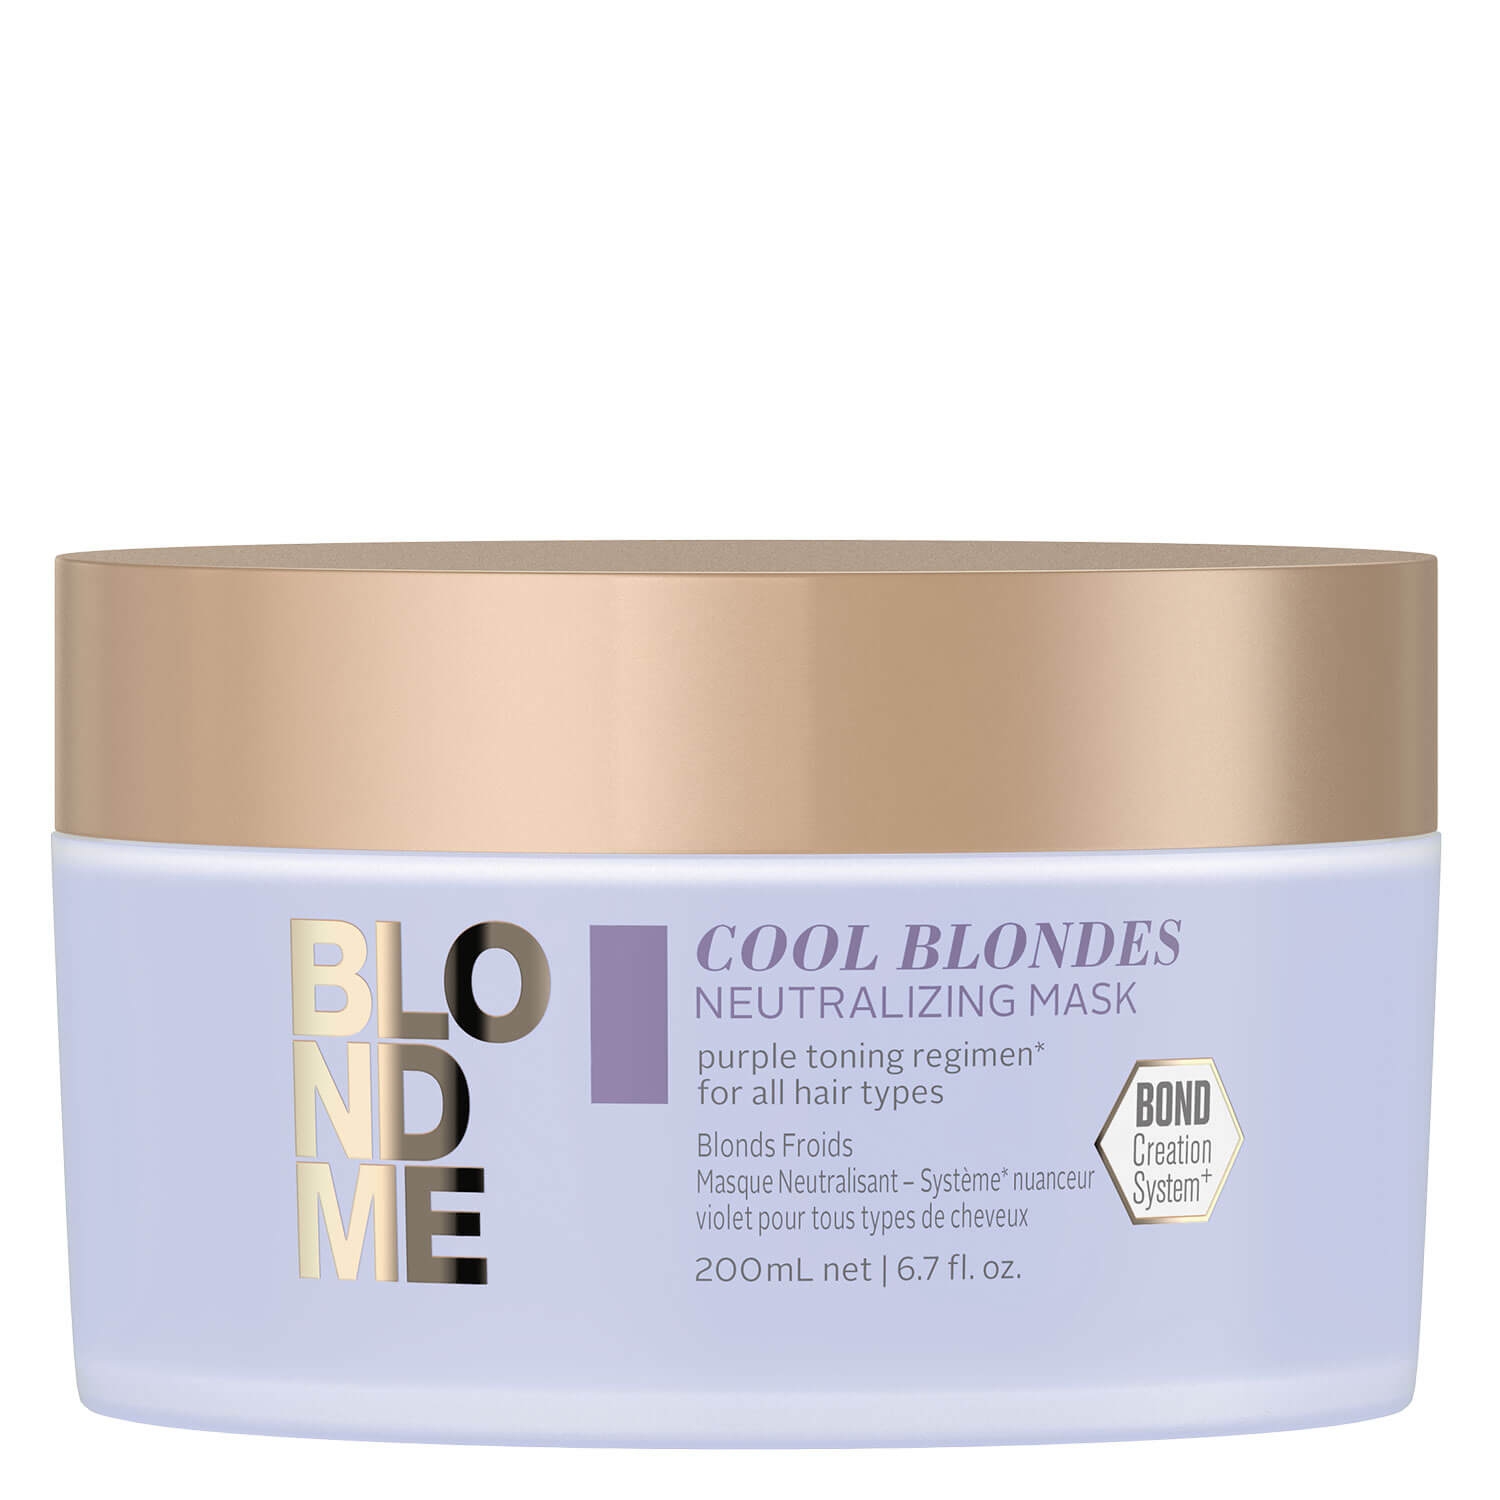 Product image from Blondme - Cool Blondes Neutralizing Mask